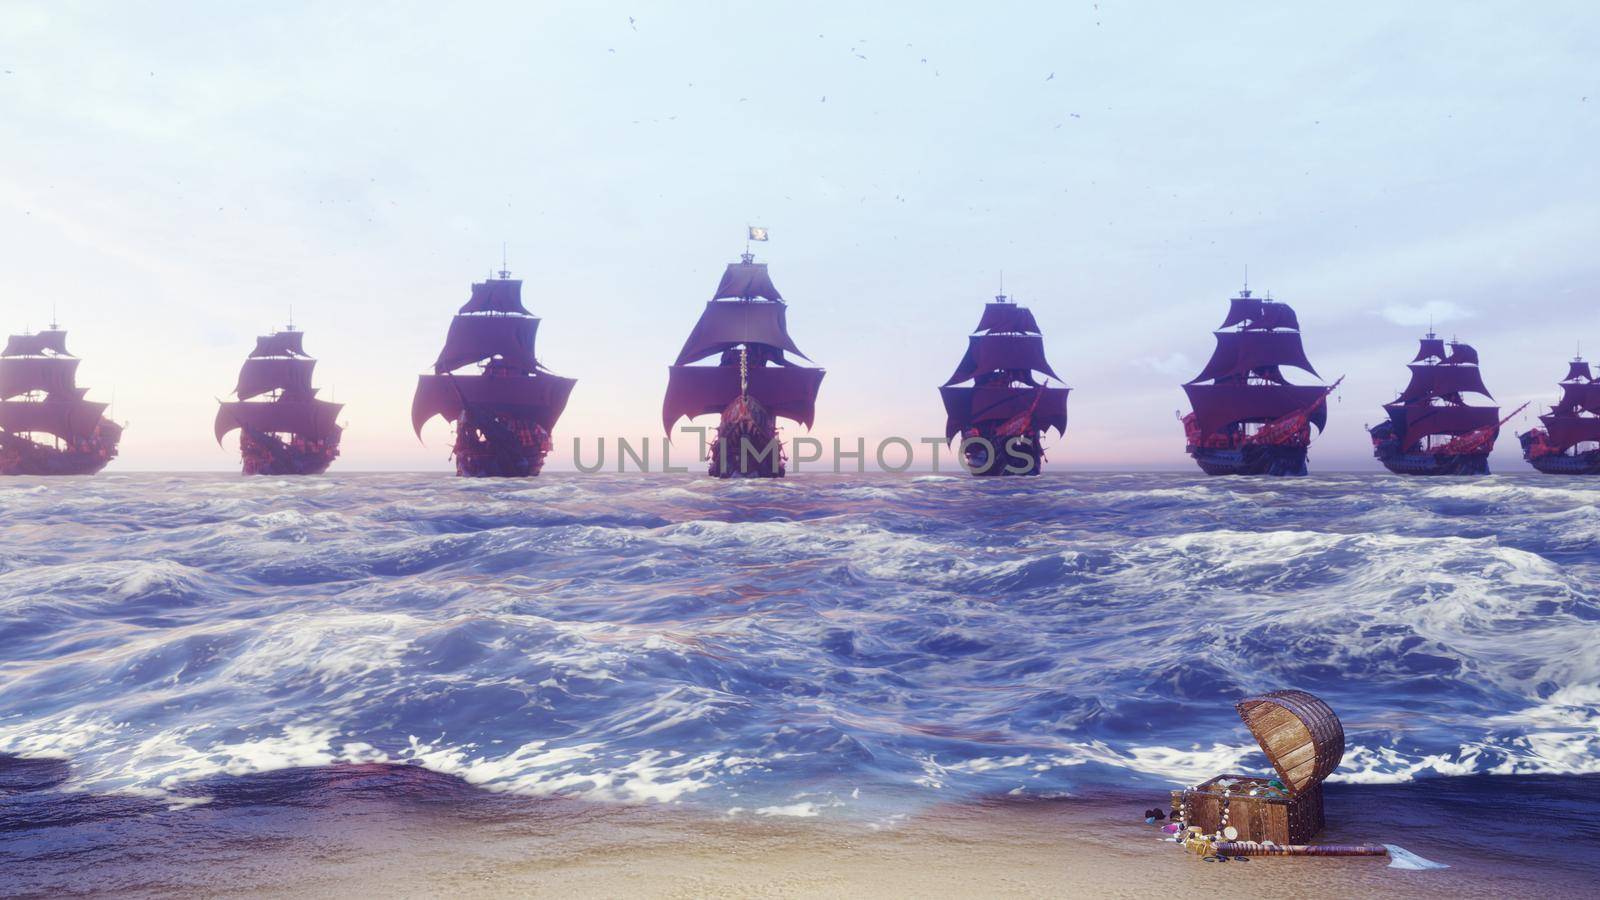 Medieval pirate ships docked at a sandy island in the vast blue ocean. The concept of sea adventures in the Middle ages. 3D rendering by designprojects